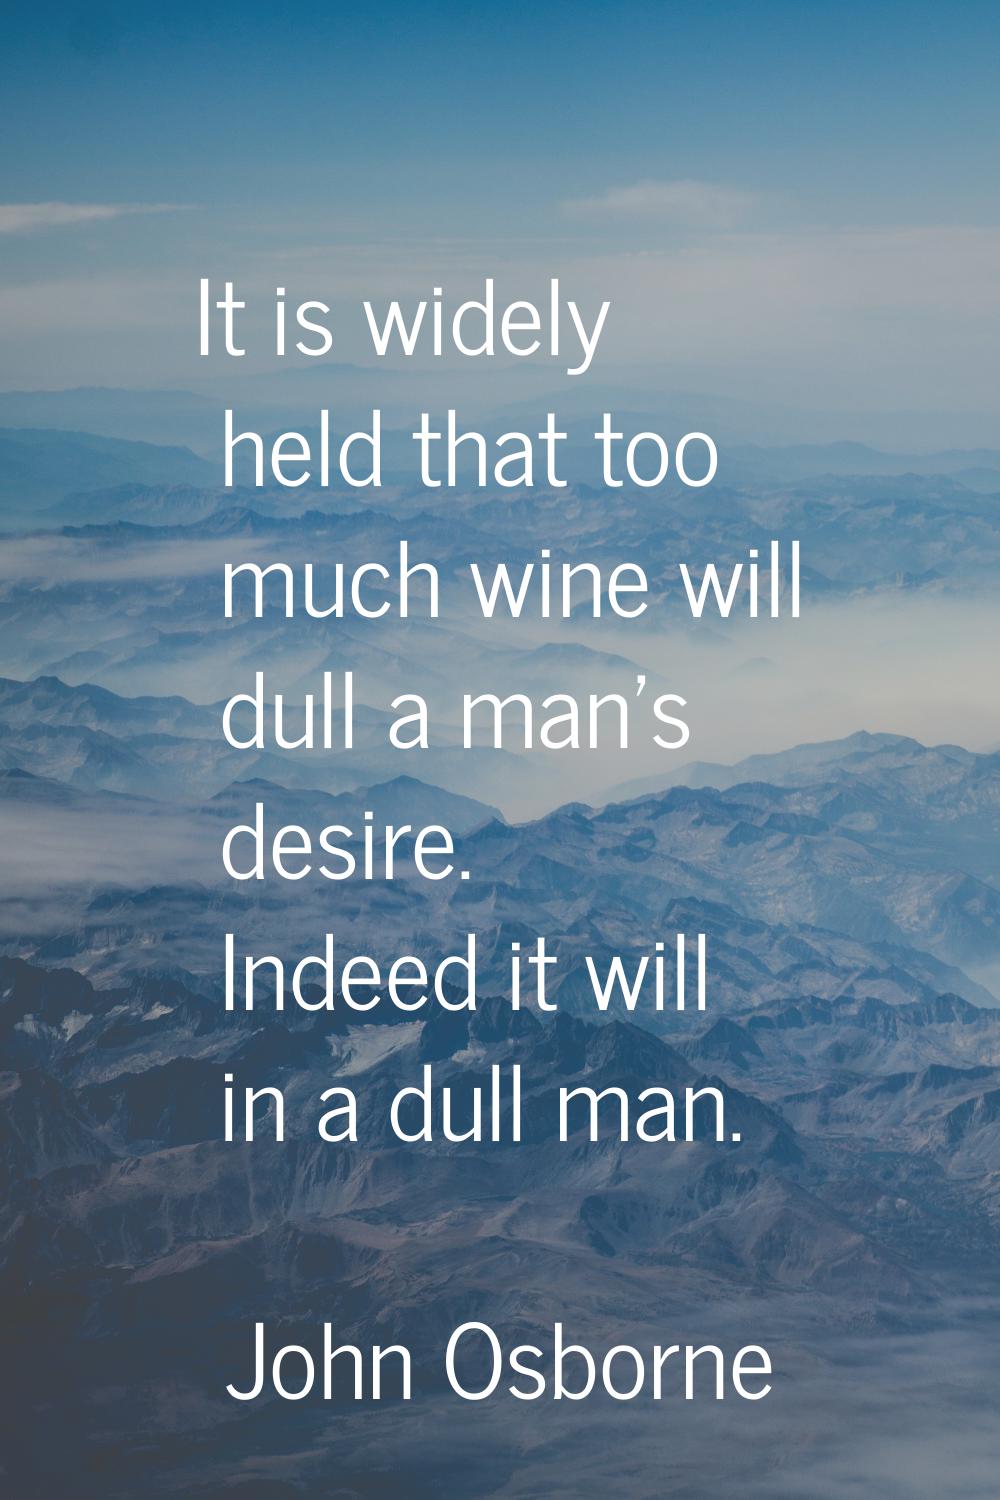 It is widely held that too much wine will dull a man's desire. Indeed it will in a dull man.